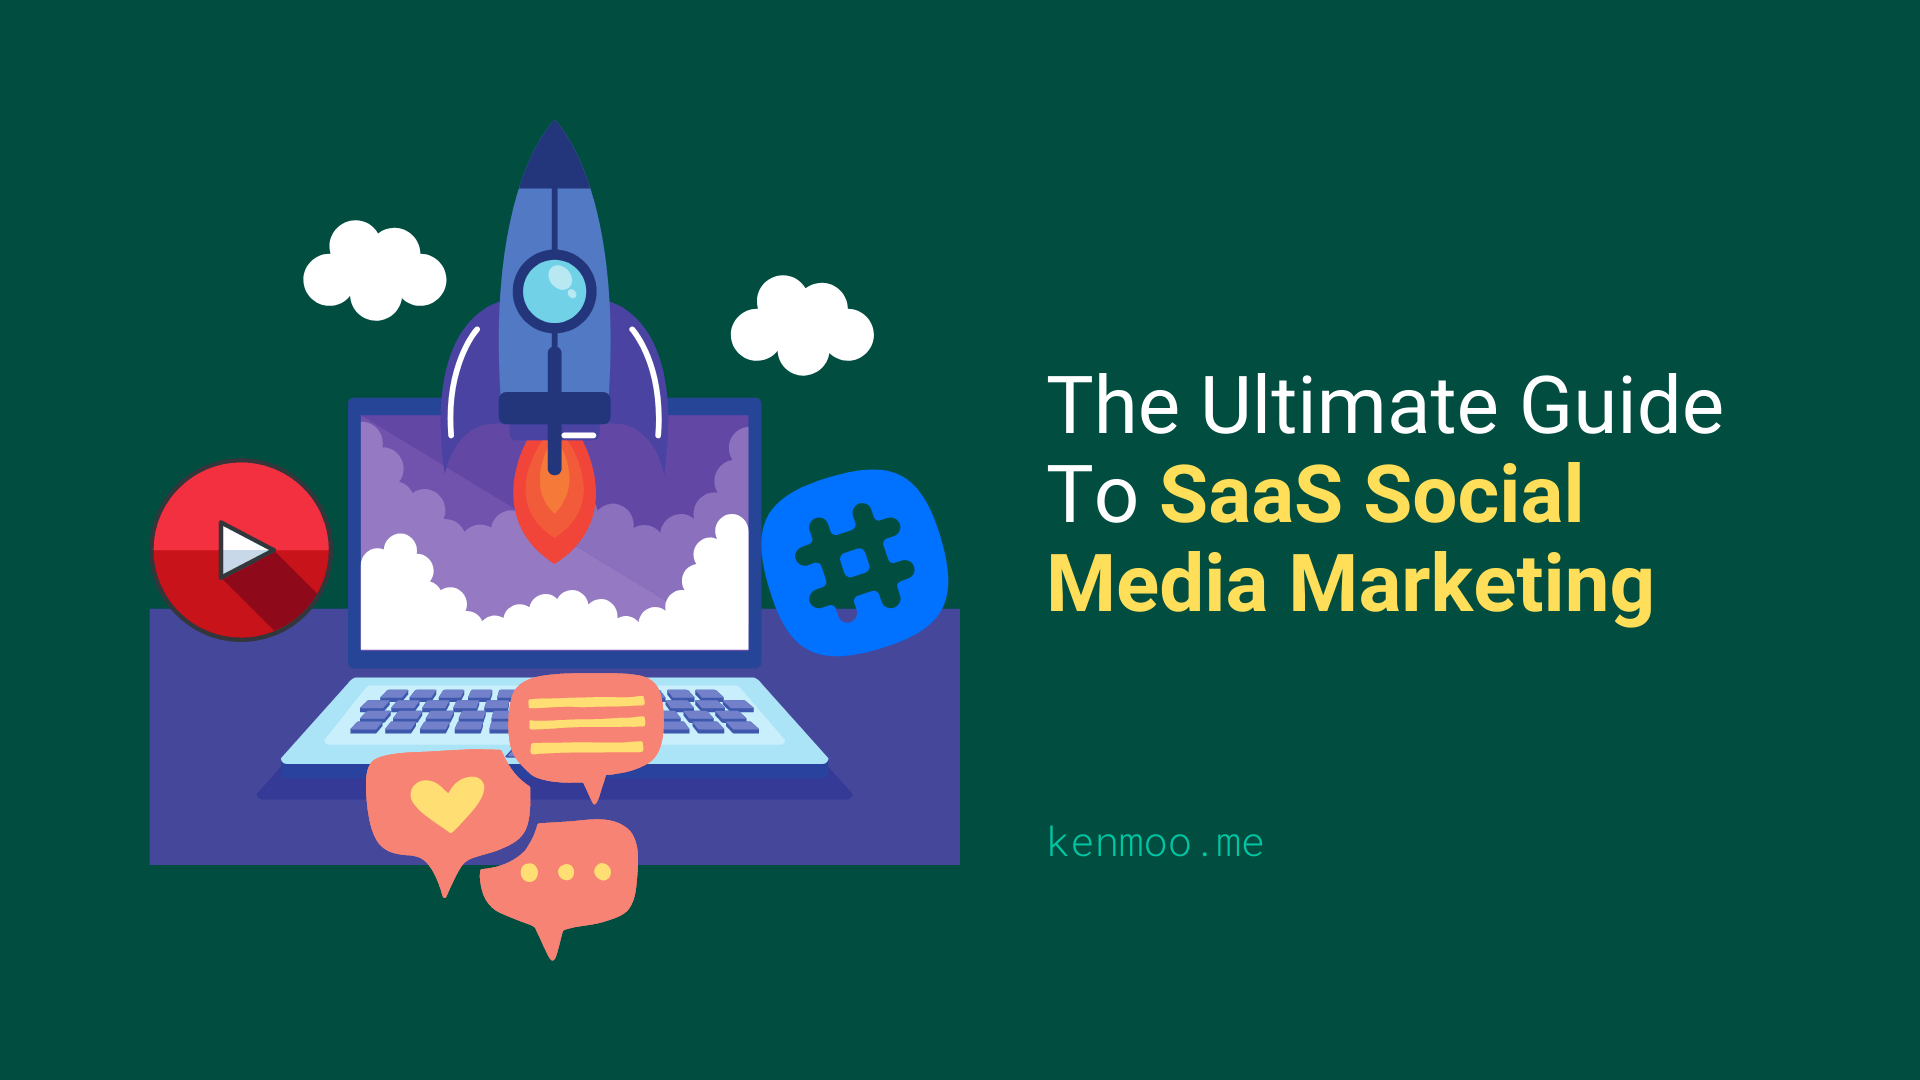 The Ultimate Guide To SaaS Social Media Marketing